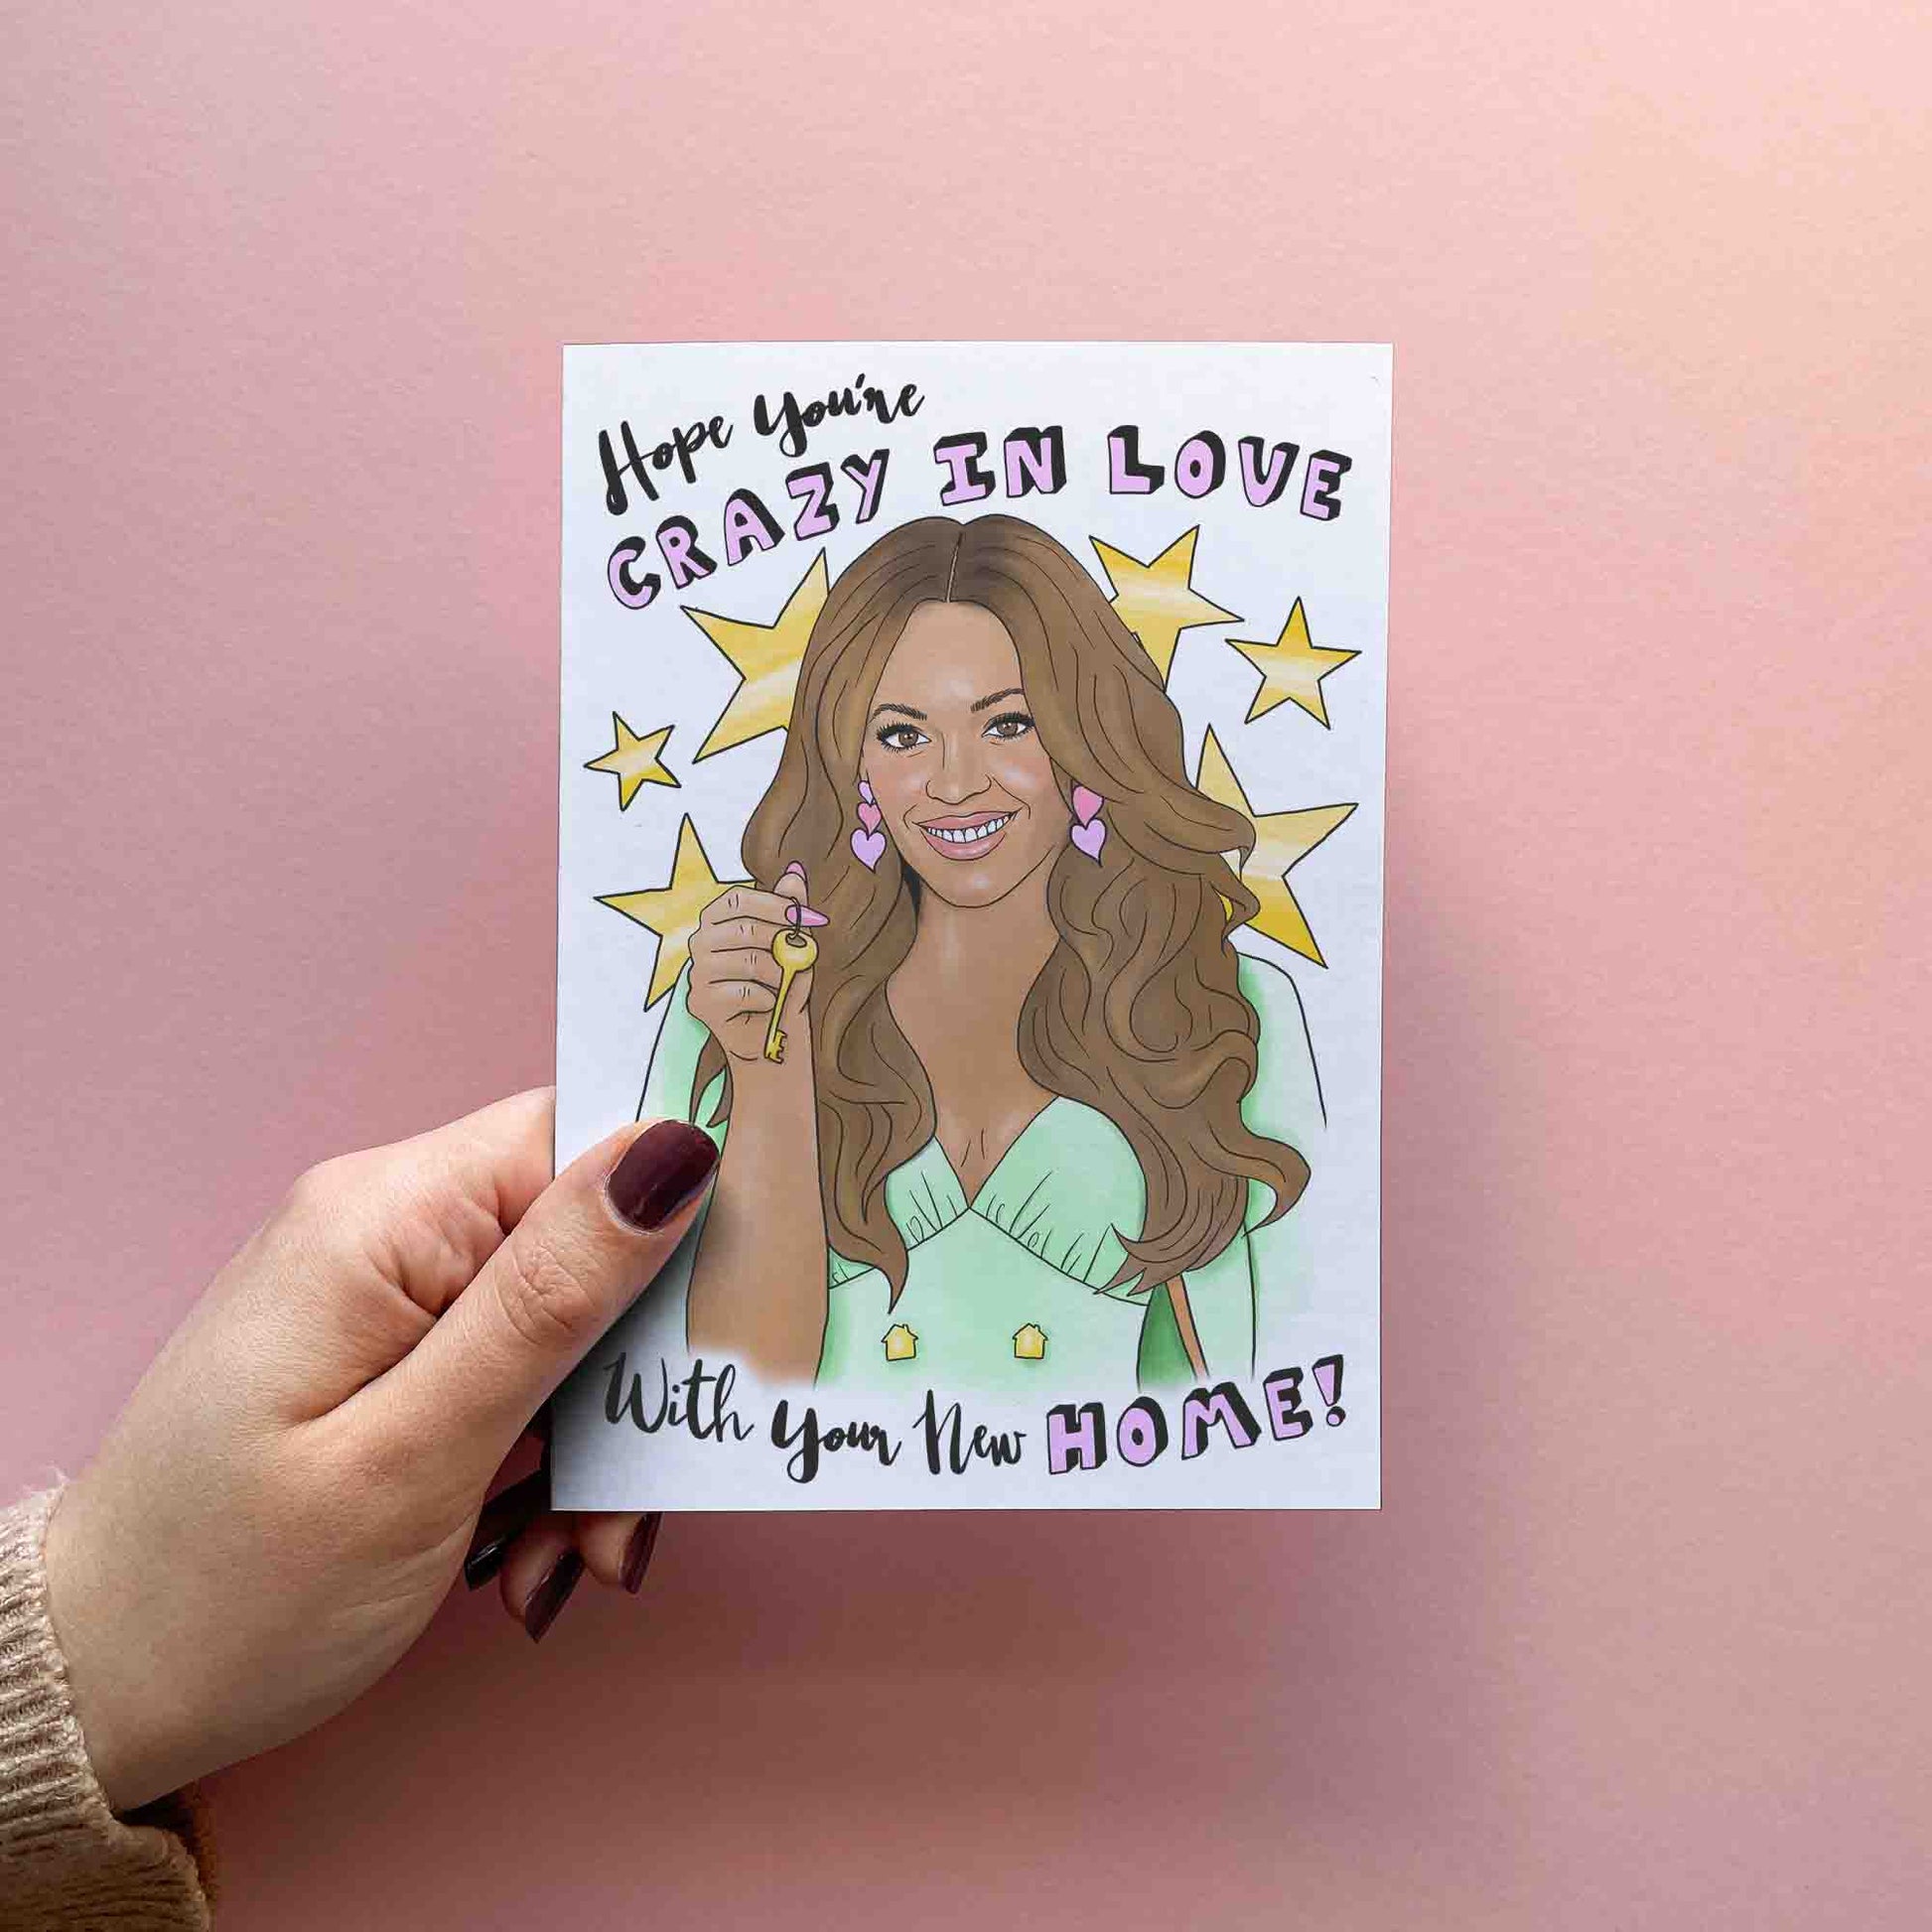 Funny new home / housewarming card reading hope you're crazy in love with your new home! Featuring an illustration resembling Beyonce holding house keys